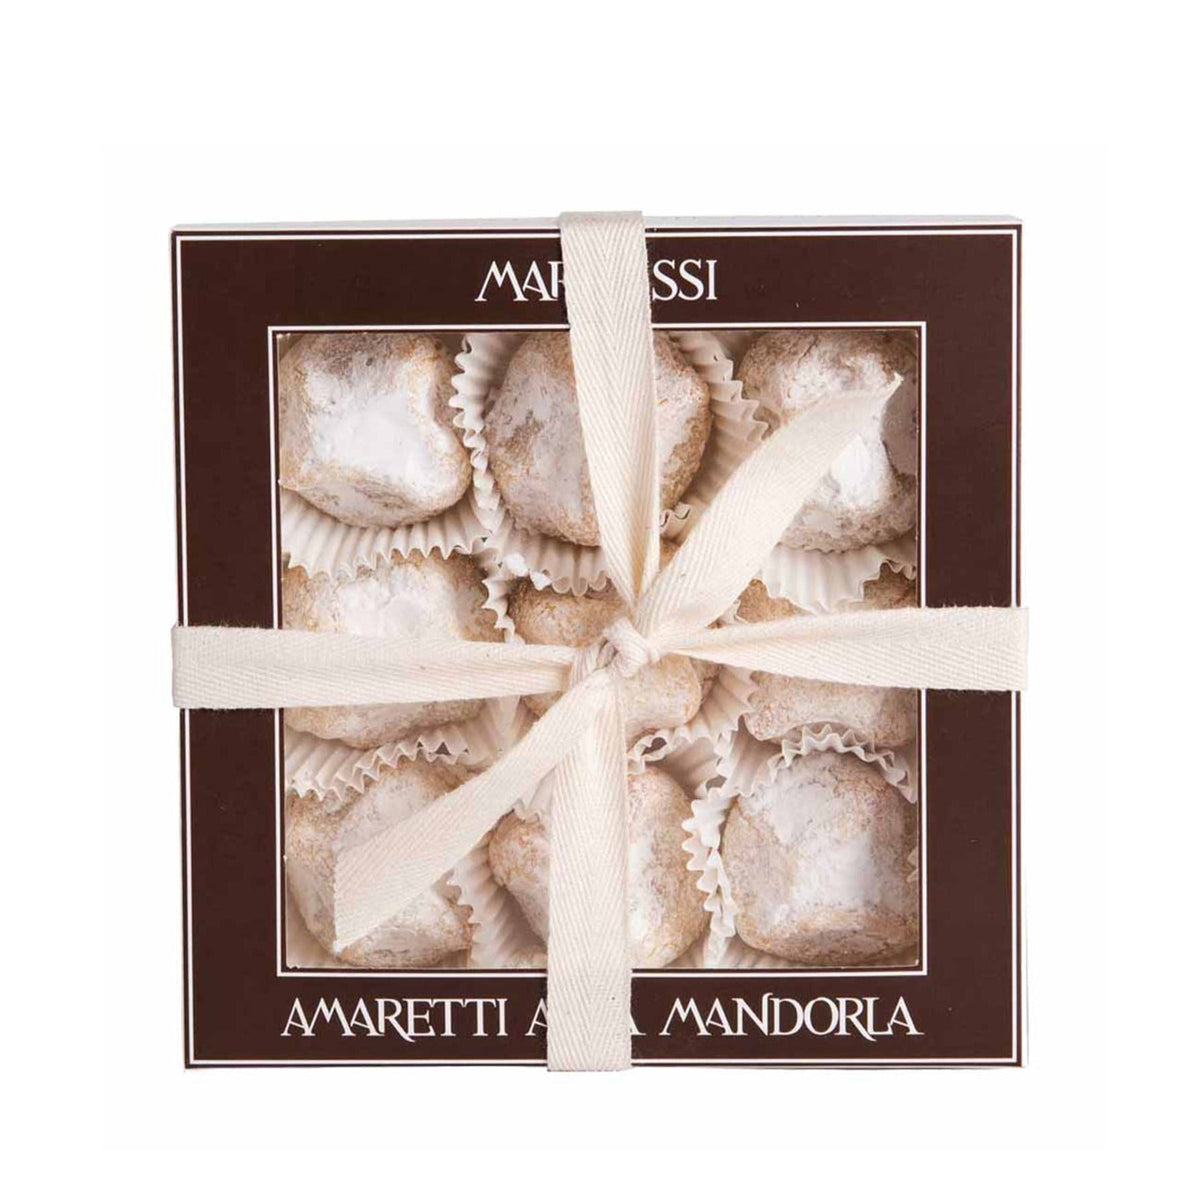 Marabissi Soft Almond Amaretti (Box) 190g  | Imported and distributed in the UK by Just Gourmet Foods